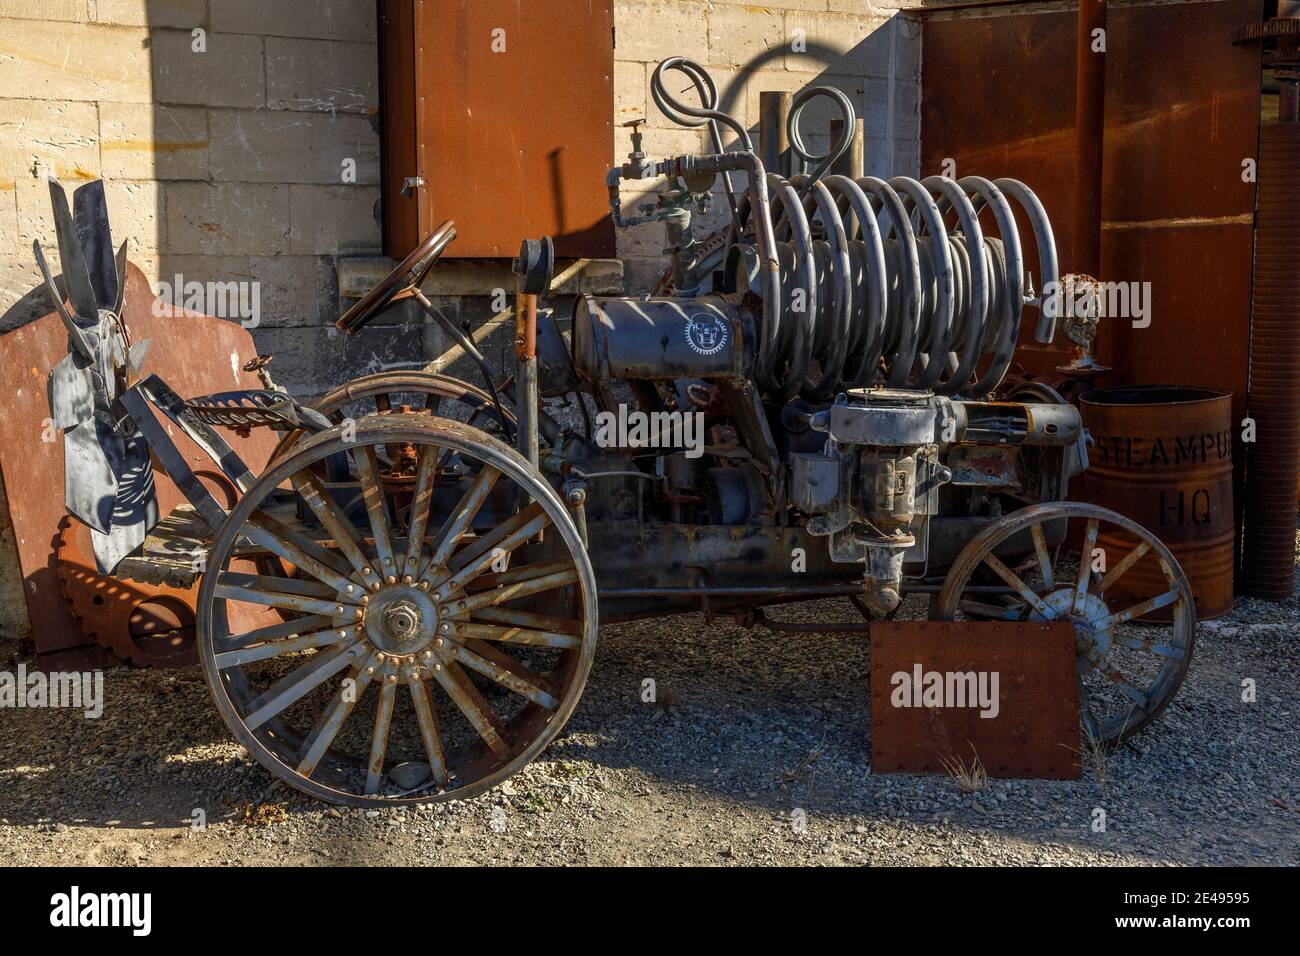 Re-imagined tractor type vehicle at the Steampunk HQ, Oamaru, New Zealand. Stock Photo